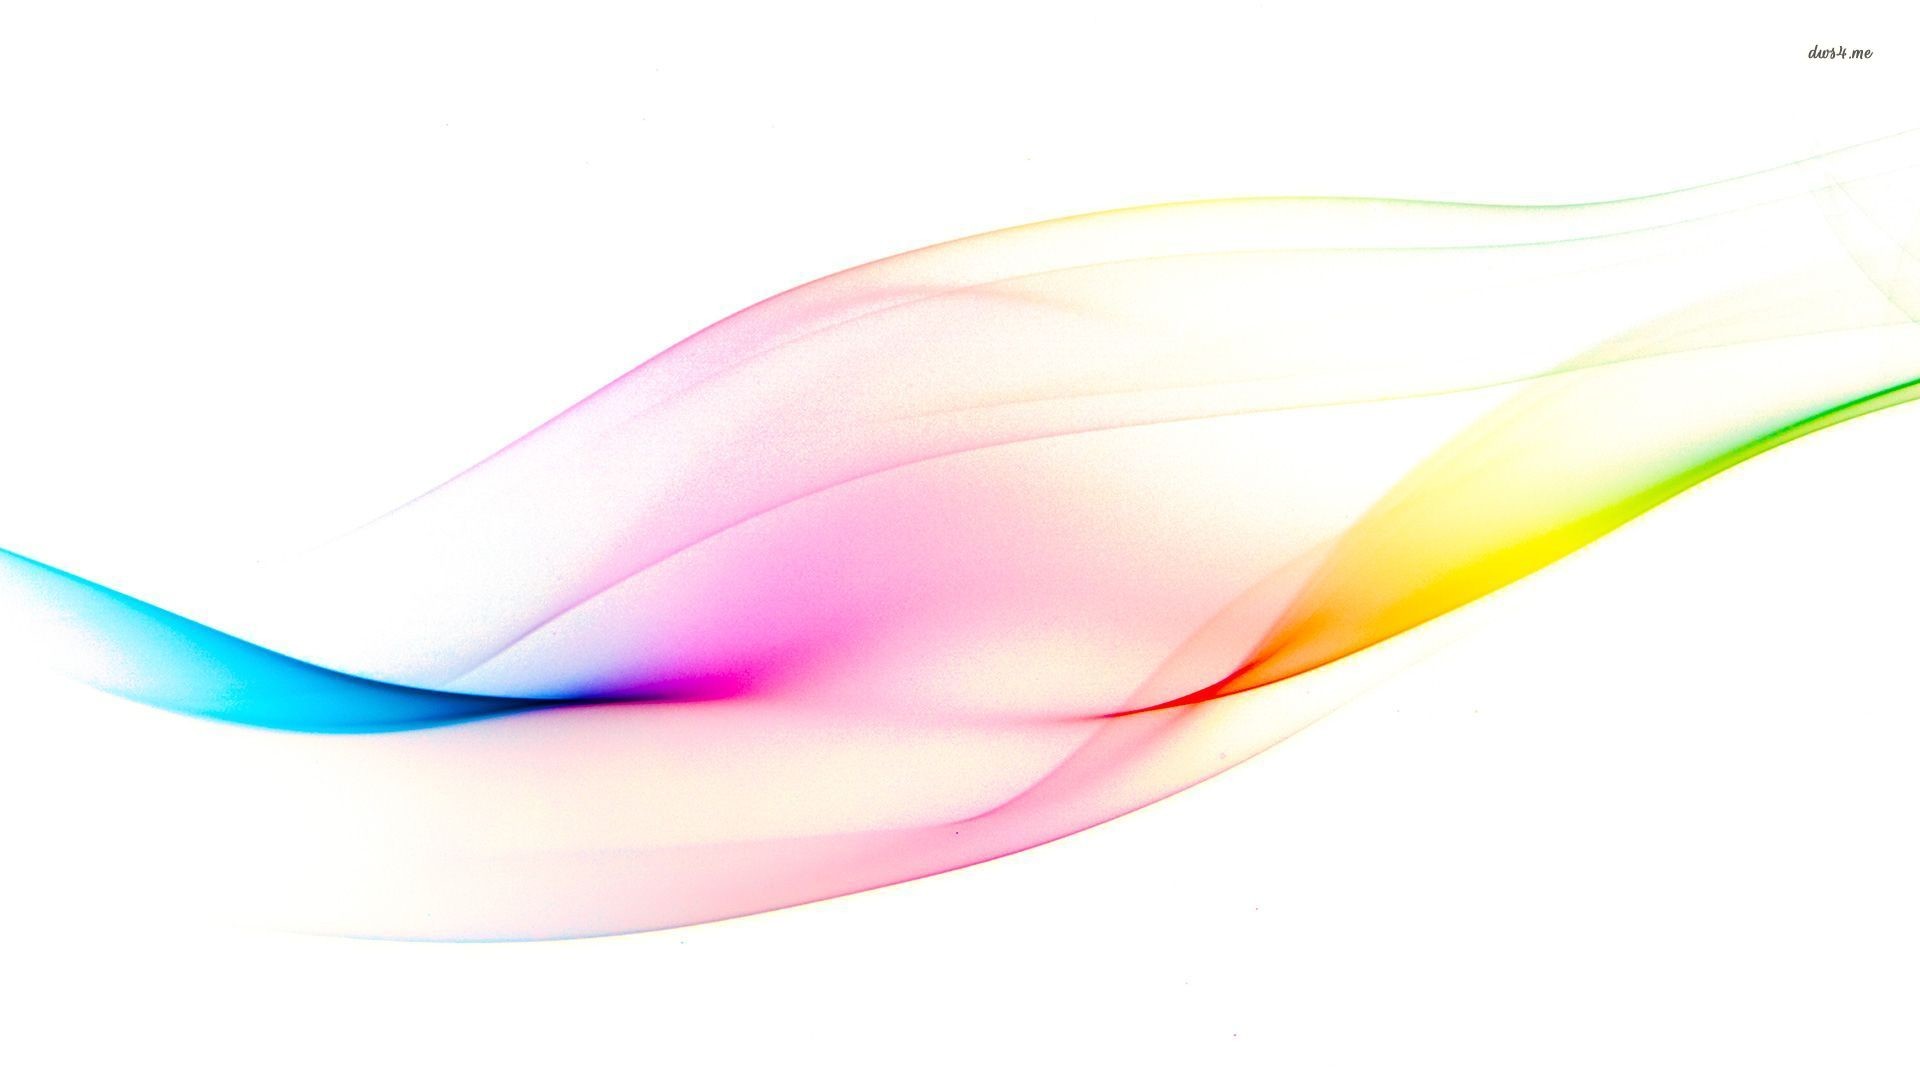 1920x1080 COLORFUL WAVES WALLPAPER. |DOWNLOAD|